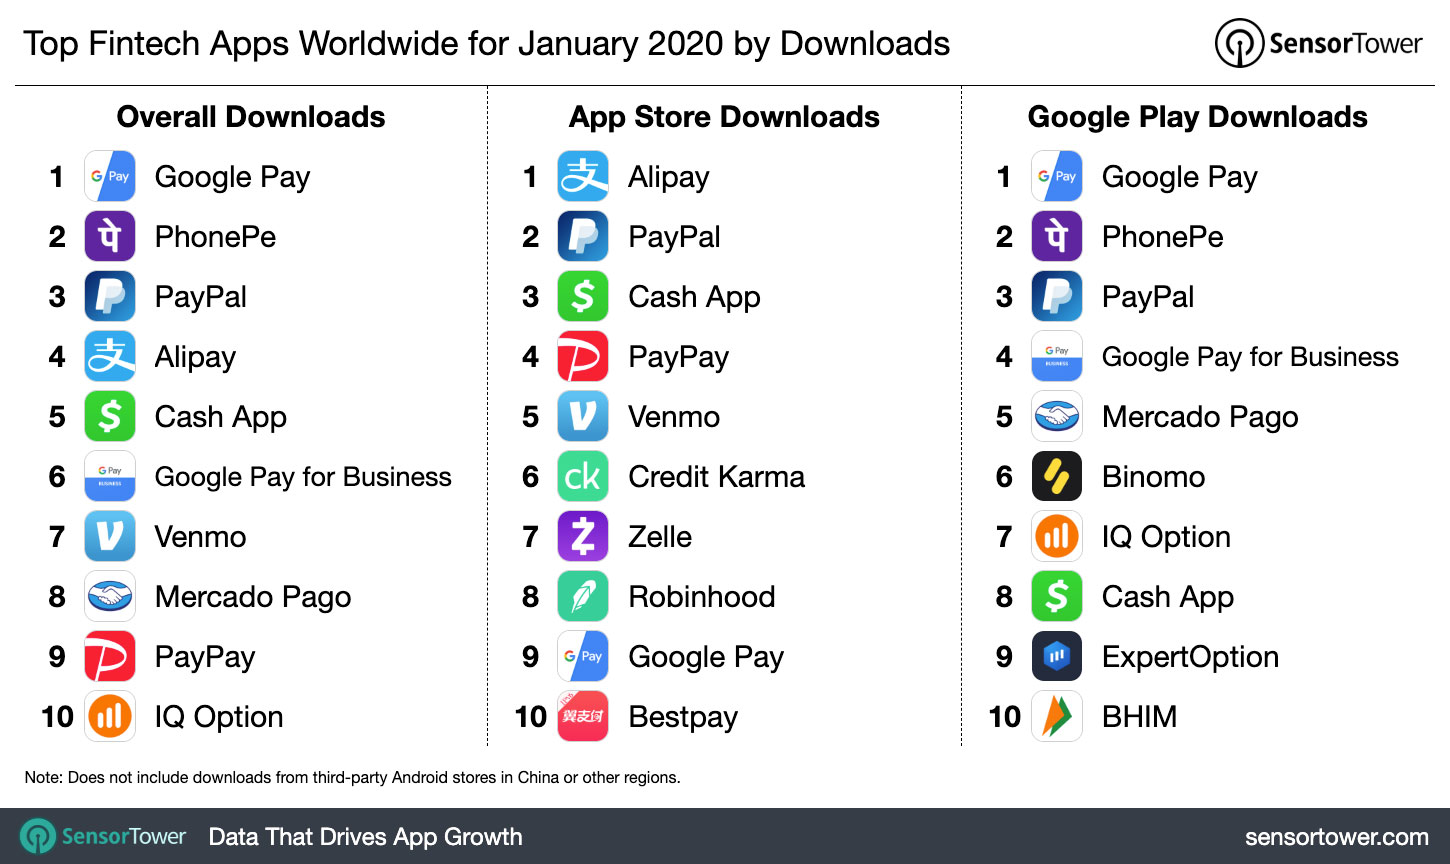 Top Fintech Apps Worldwide for January 2020 by Downloads